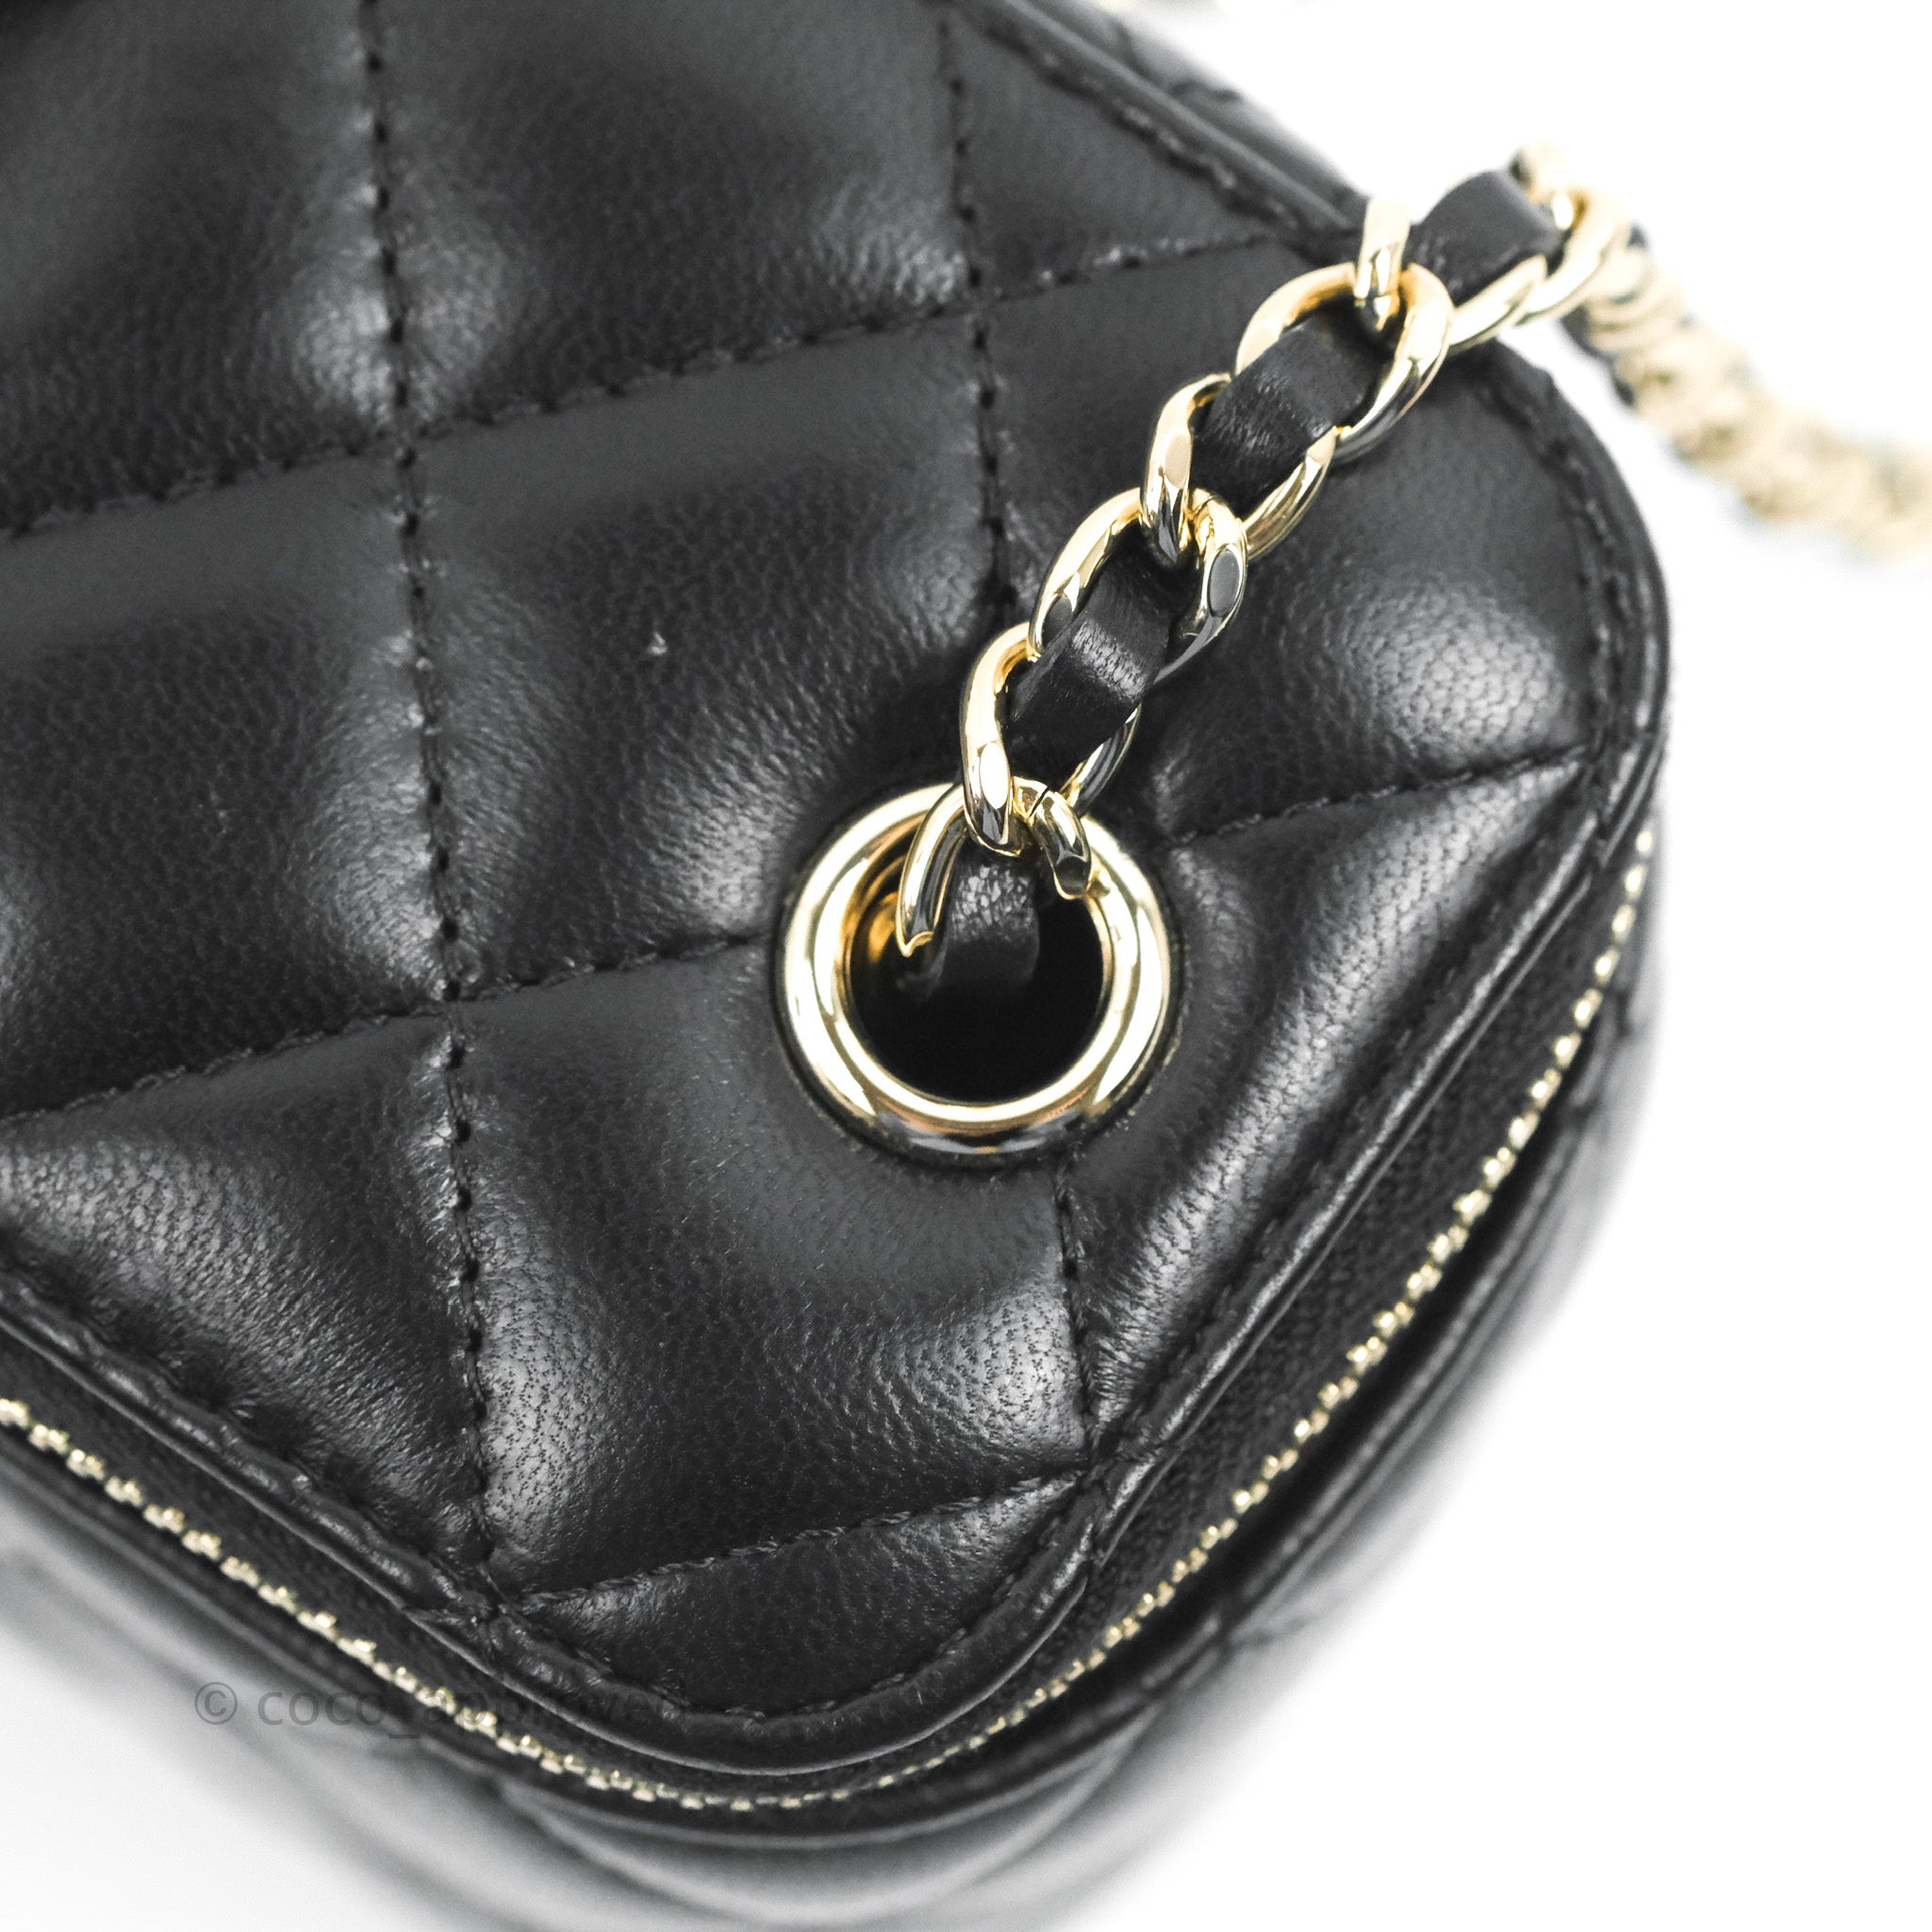 CHANEL Lambskin Crochet Quilted Small Vanity Case With Chain Black